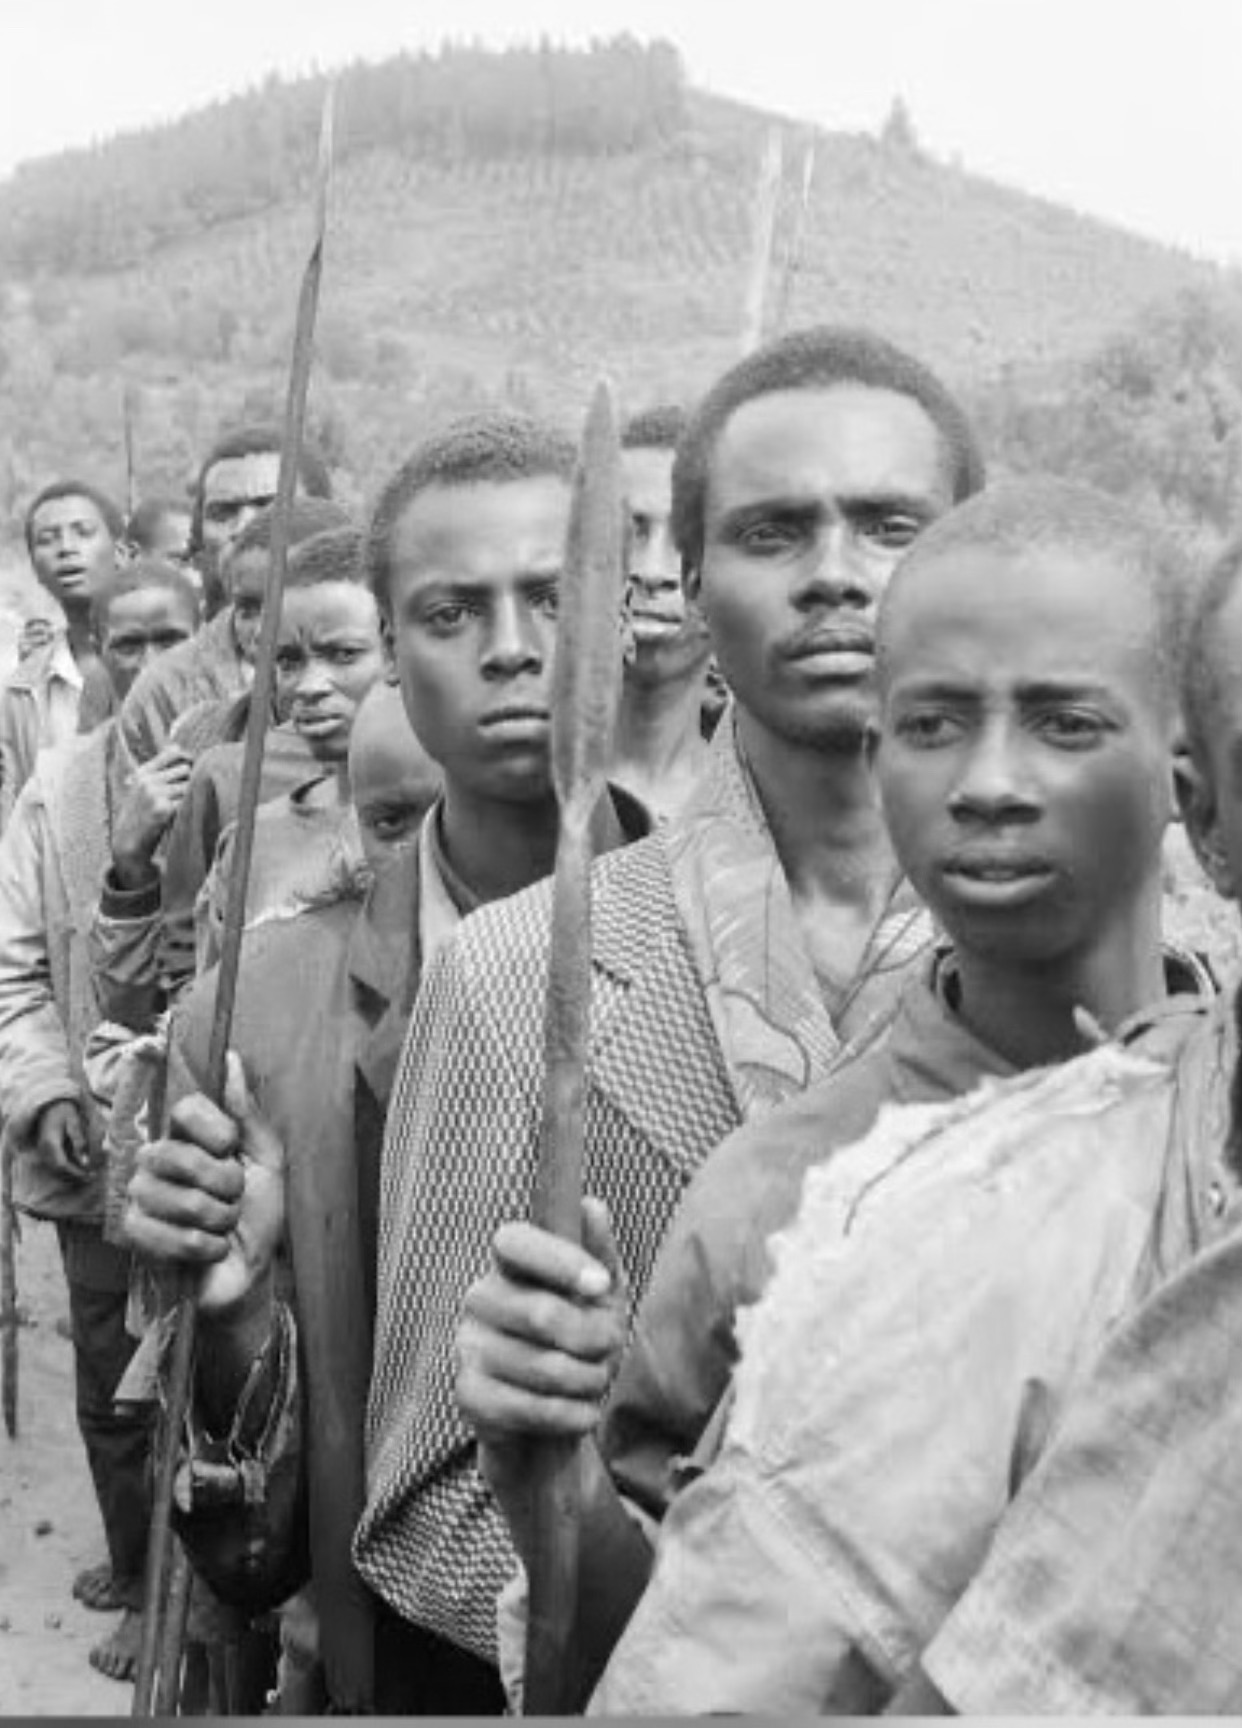 Young men in Bisesero, under the leadership of elders such as Aminadab Birara, took up spears, stones, and firearms to resist Hutu attackers. (Photo by Gysembergh Benoit/Paris Match via Getty Images)